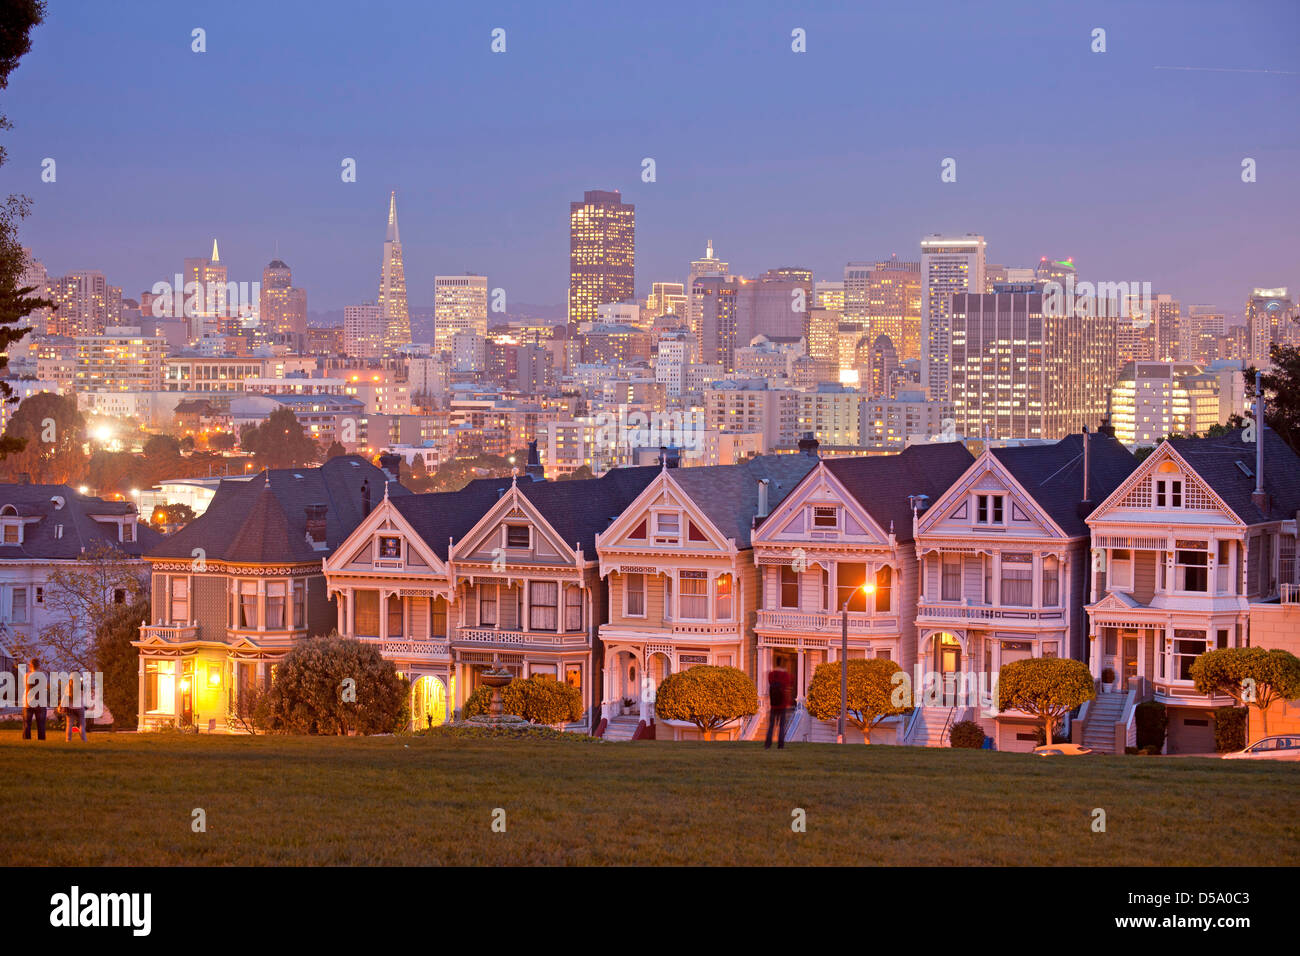 Victorian houses Painted Ladies at Alamo Square and the Skyline of San Francisco at night, California, Stock Photo